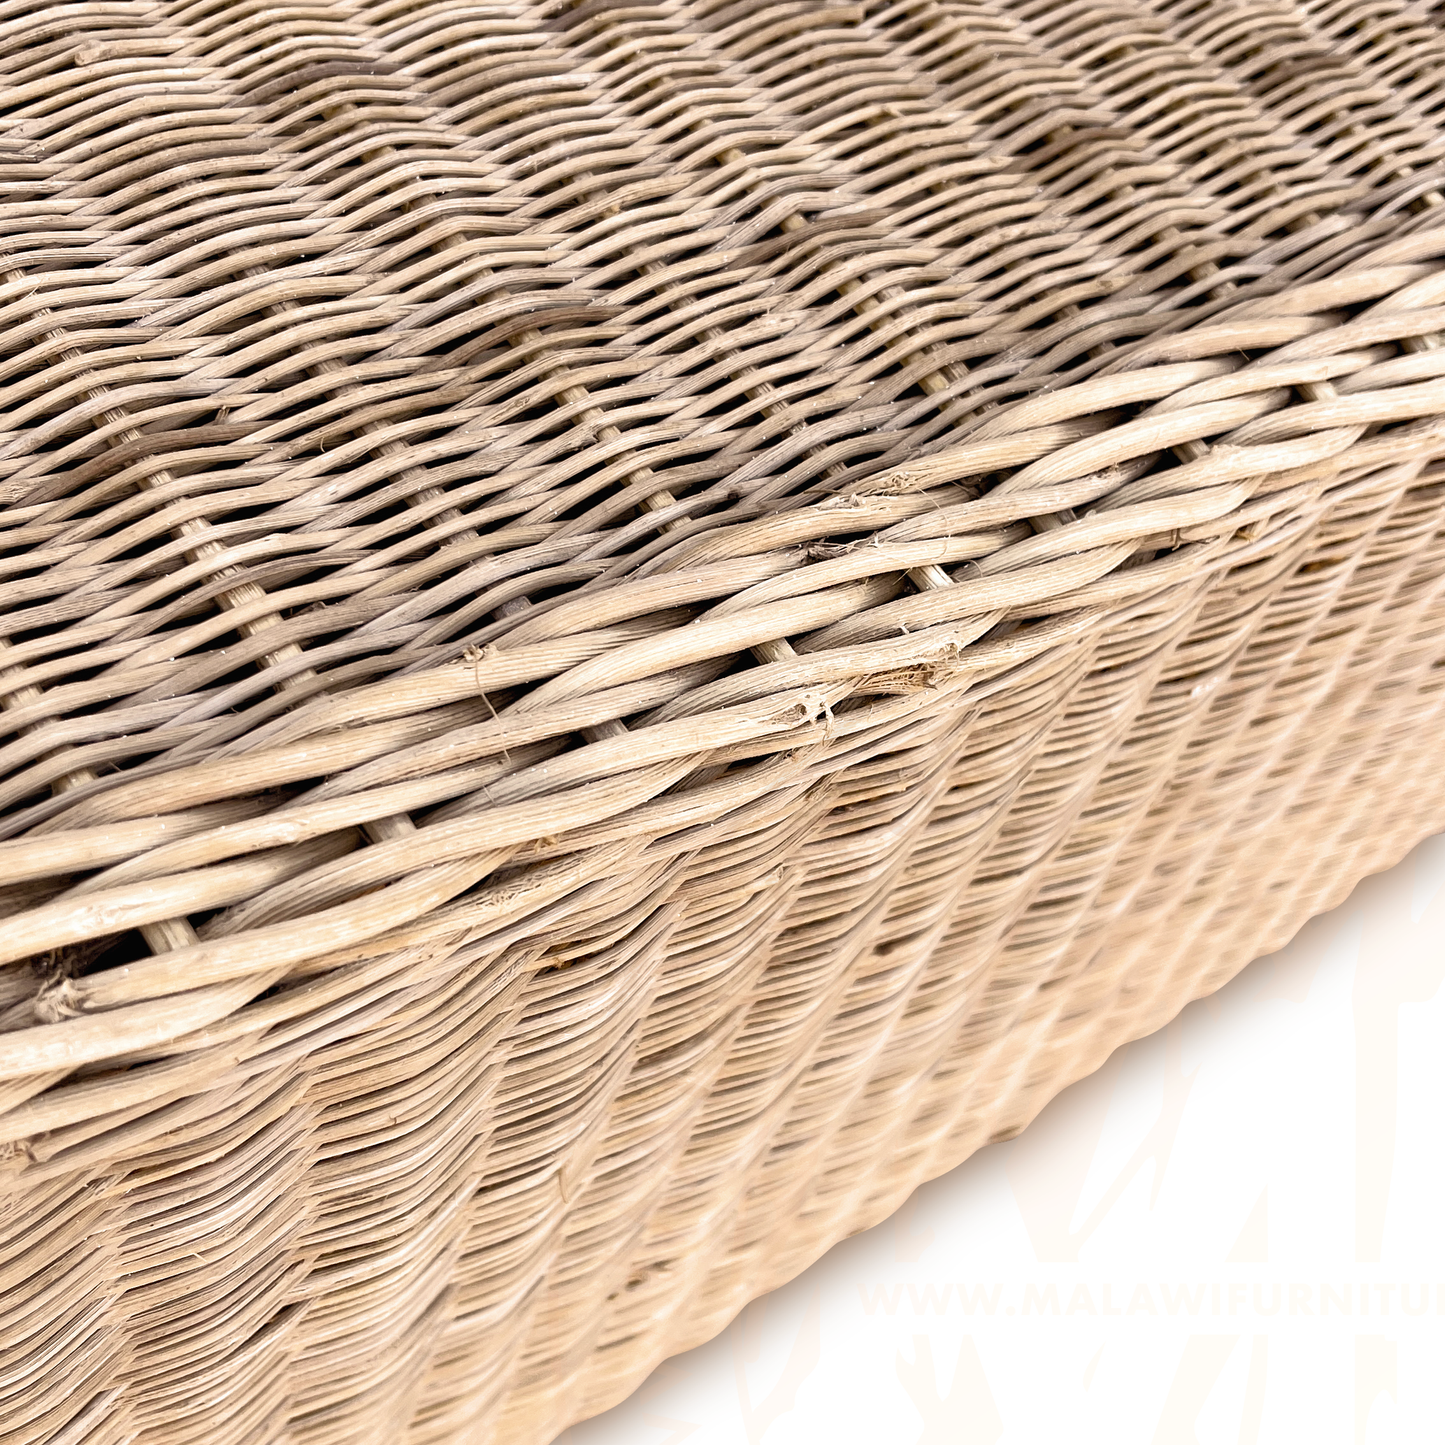 BOX Malawi Couch – One Seater hand weaved woven rattan cane chair malawi patio outdoor